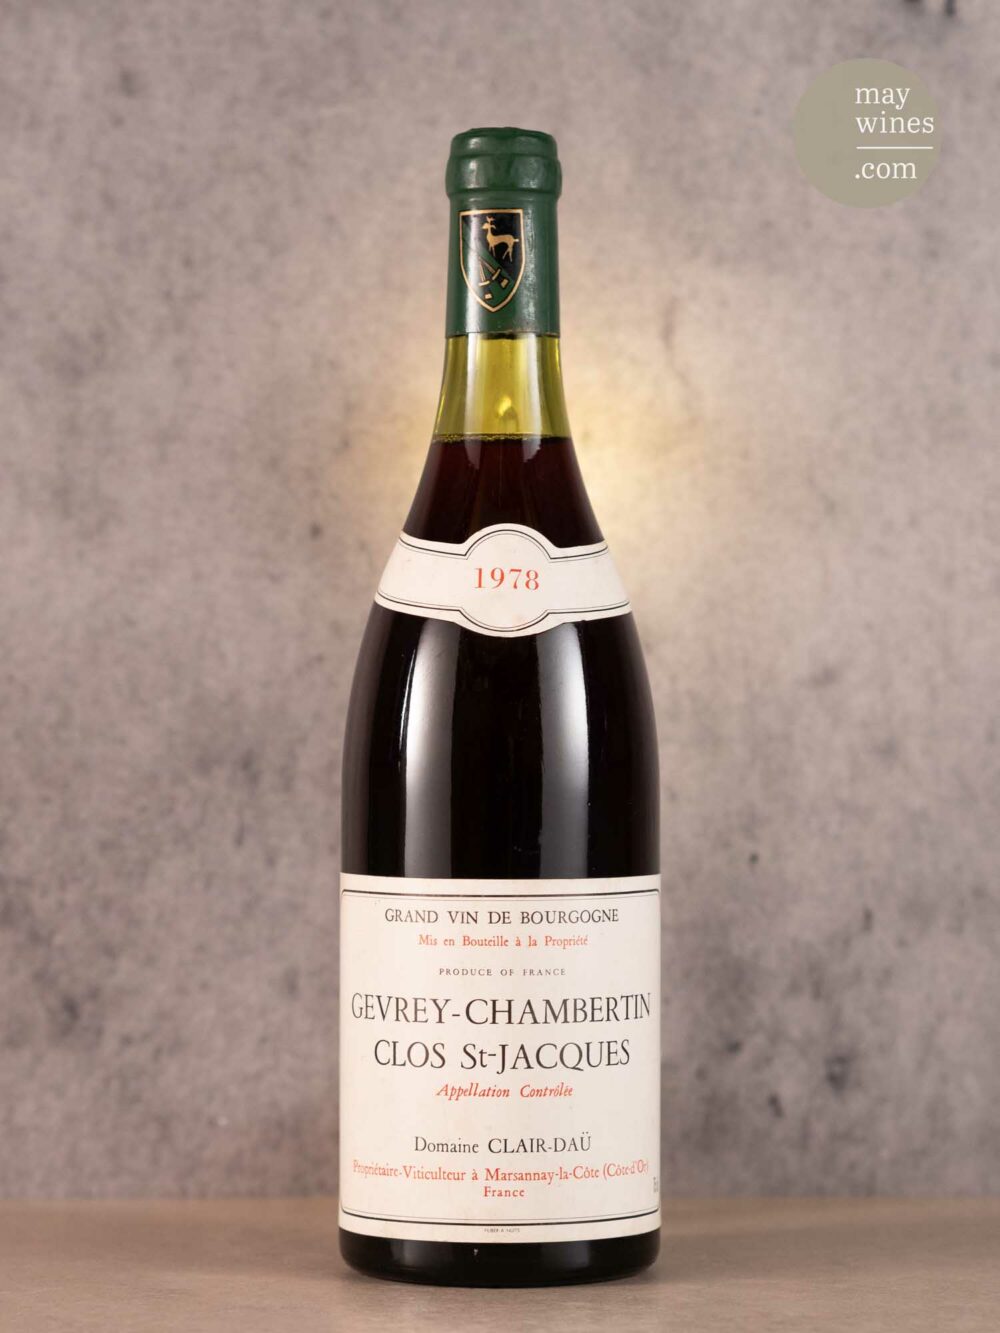 May Wines – Rotwein – 1978 Clos St. Jacques Premier Cru - Domaine Clair Daü